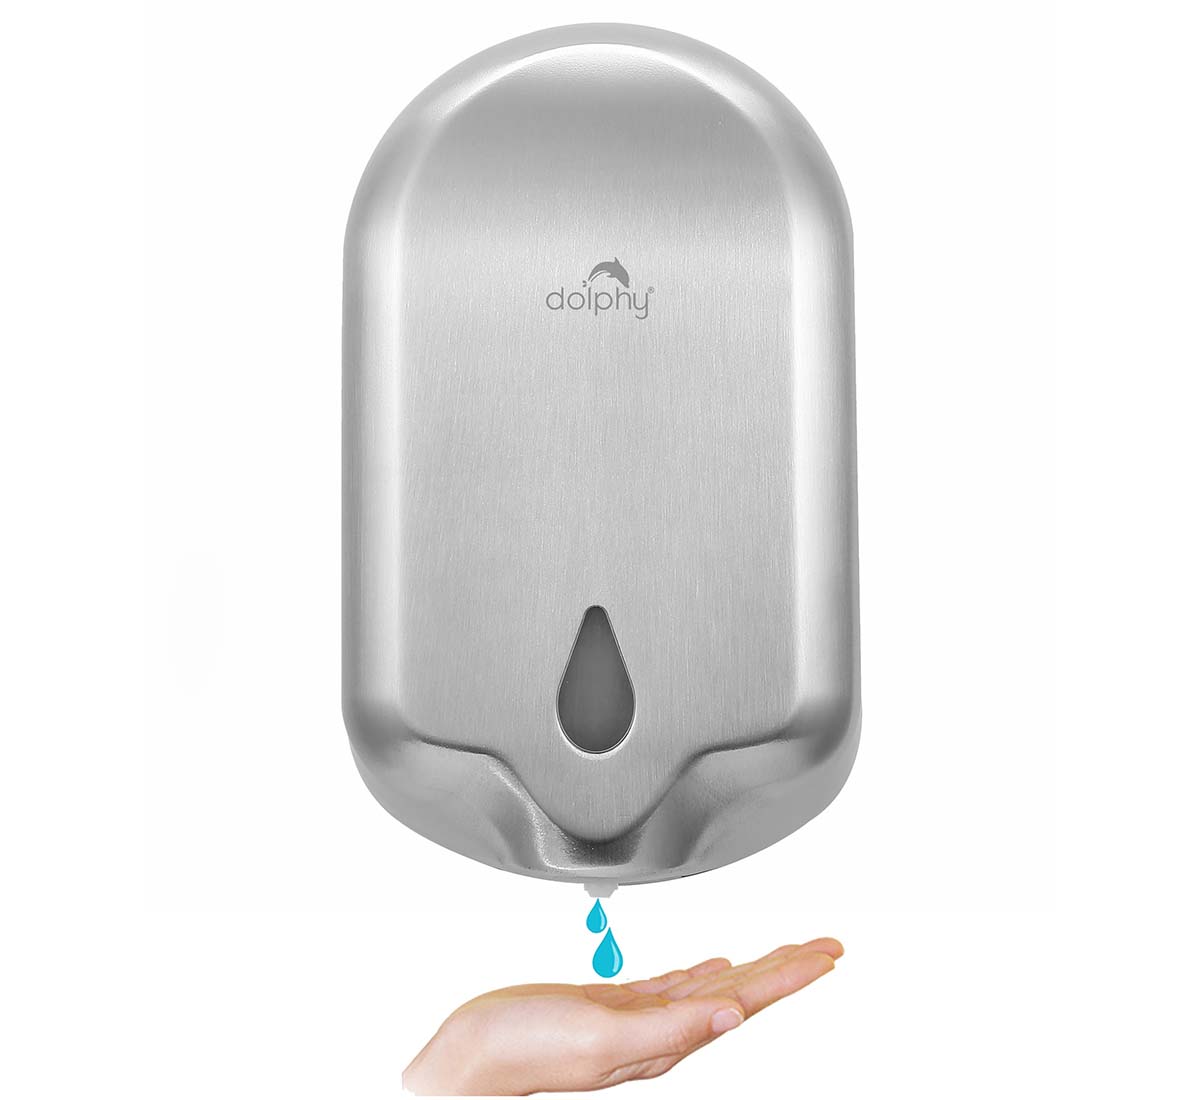 https://dolphy.in/upload/client/Dolphy%20automatic%20soap%20dispenser%20-%20WASHROOM%20AUTOMATION.jpg